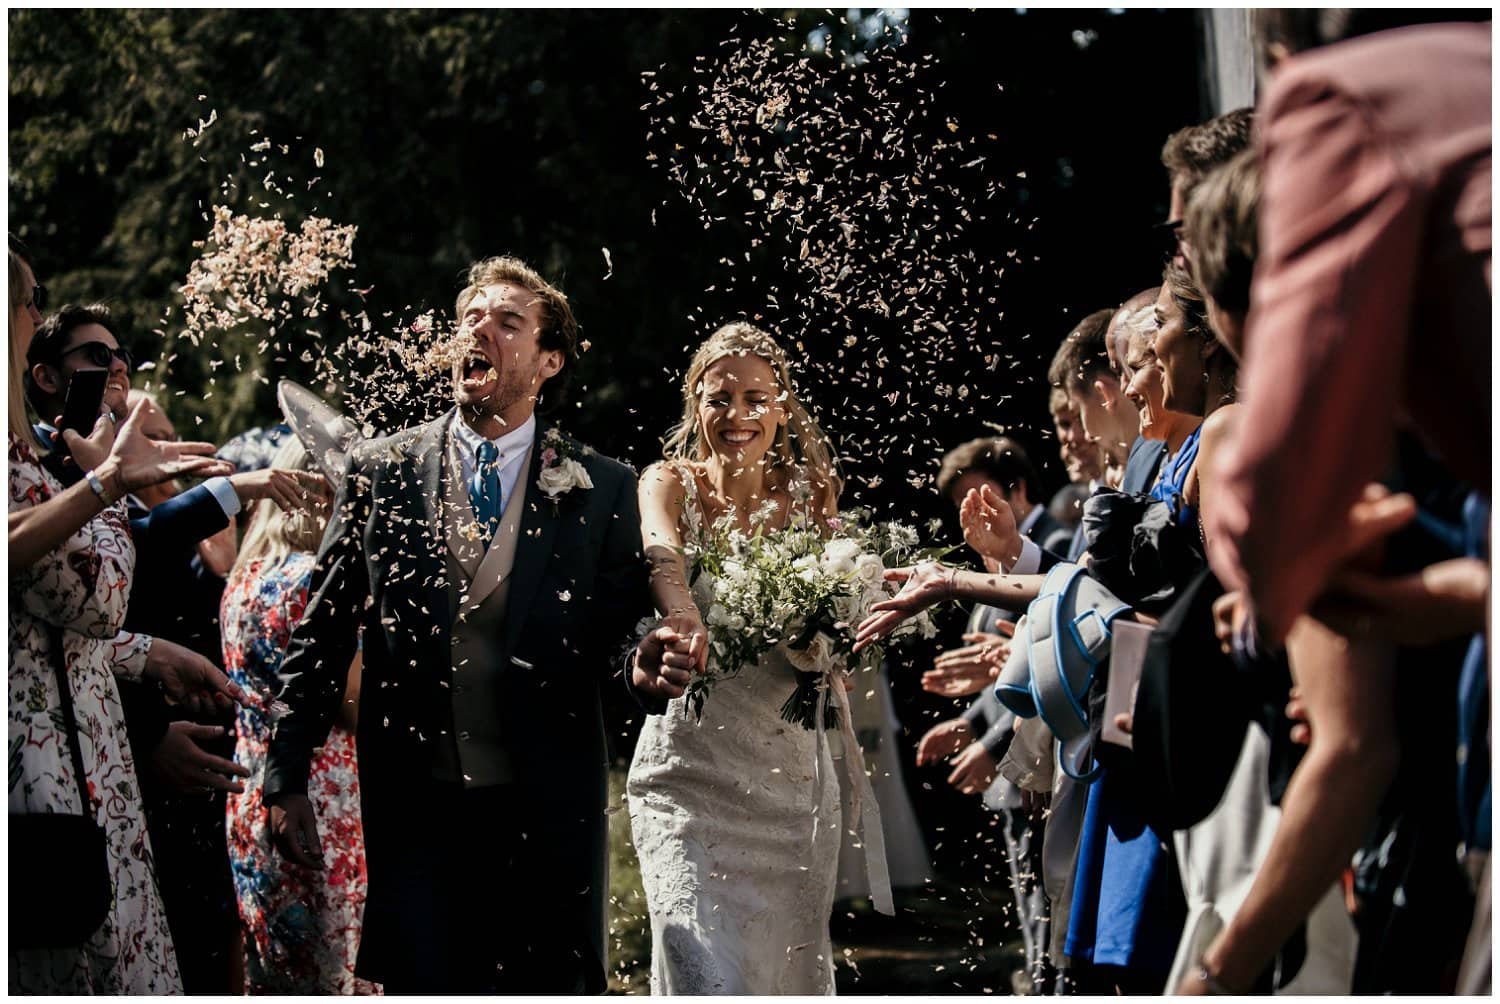 The wedding of Naomi and JJ. By Mark Shaw Photography